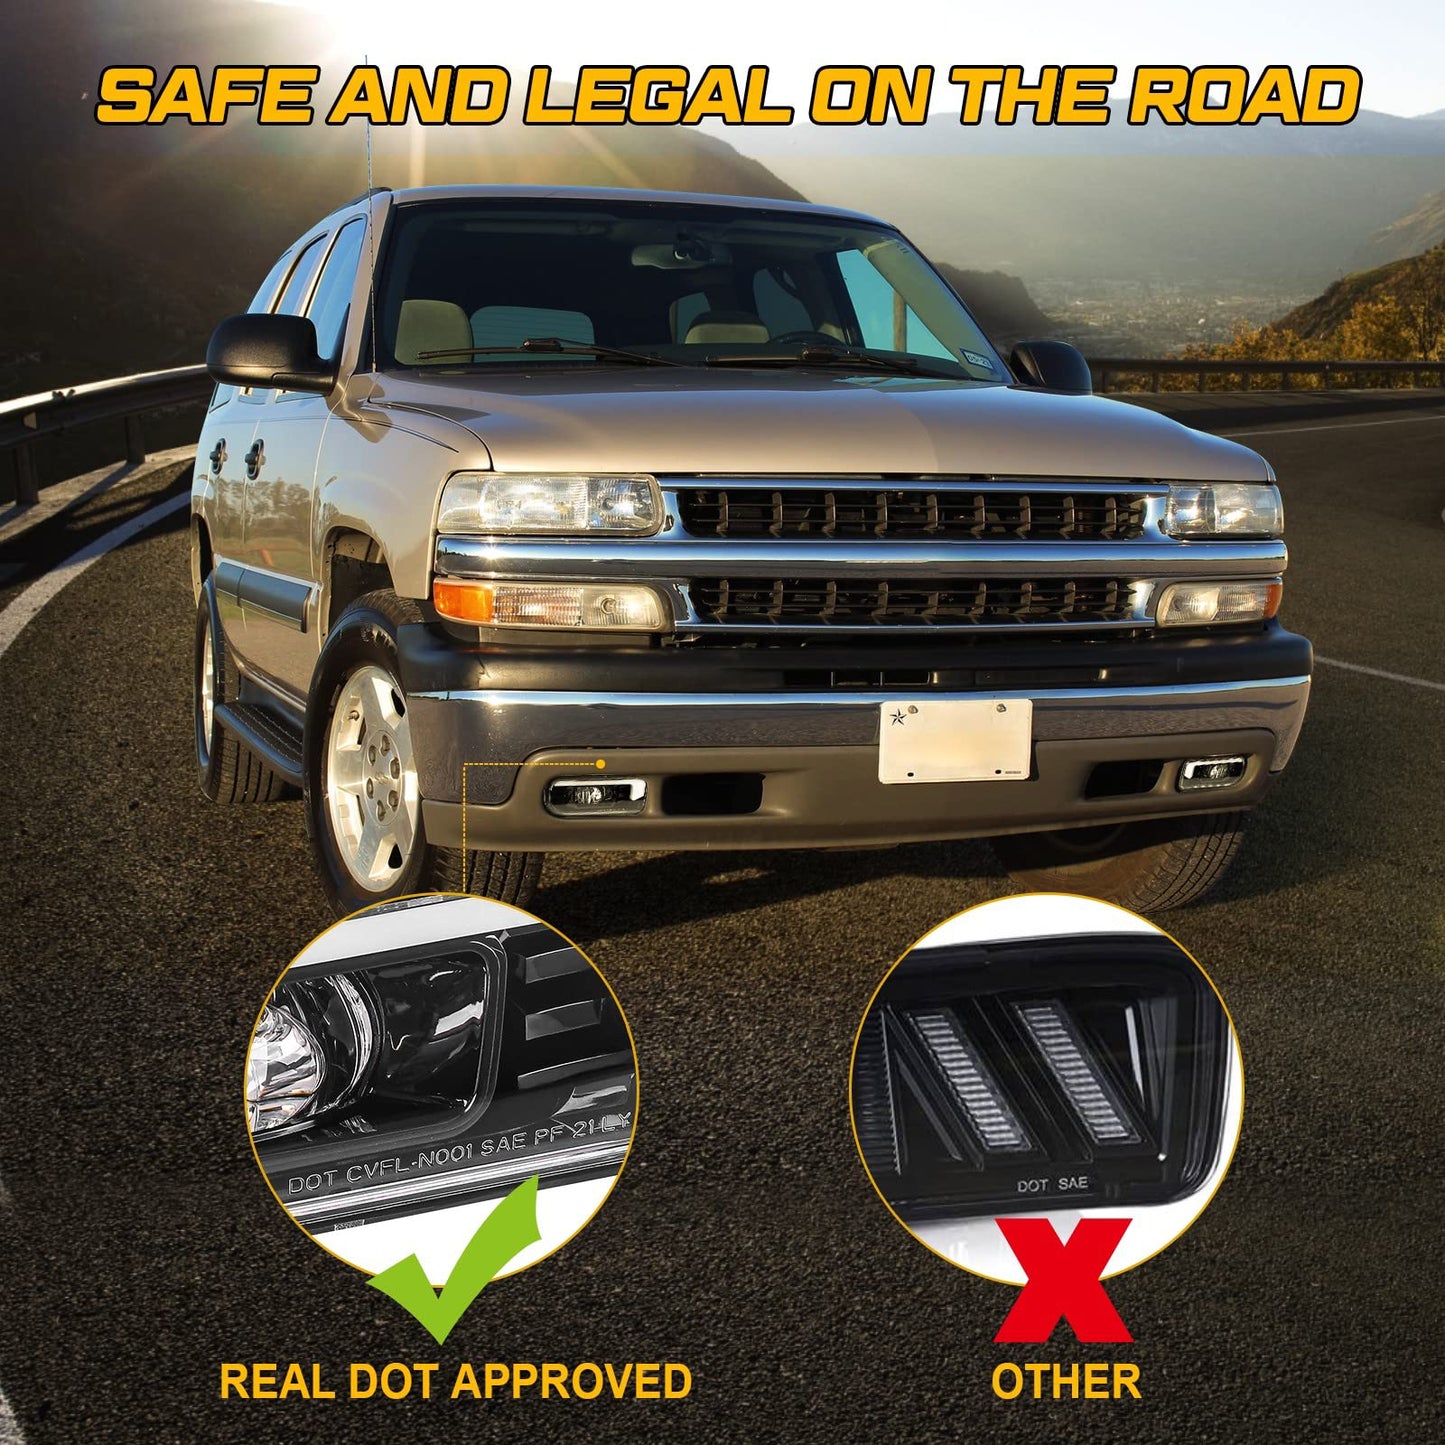 LOYO LED Fog Lights for Chevy, DOT Approved